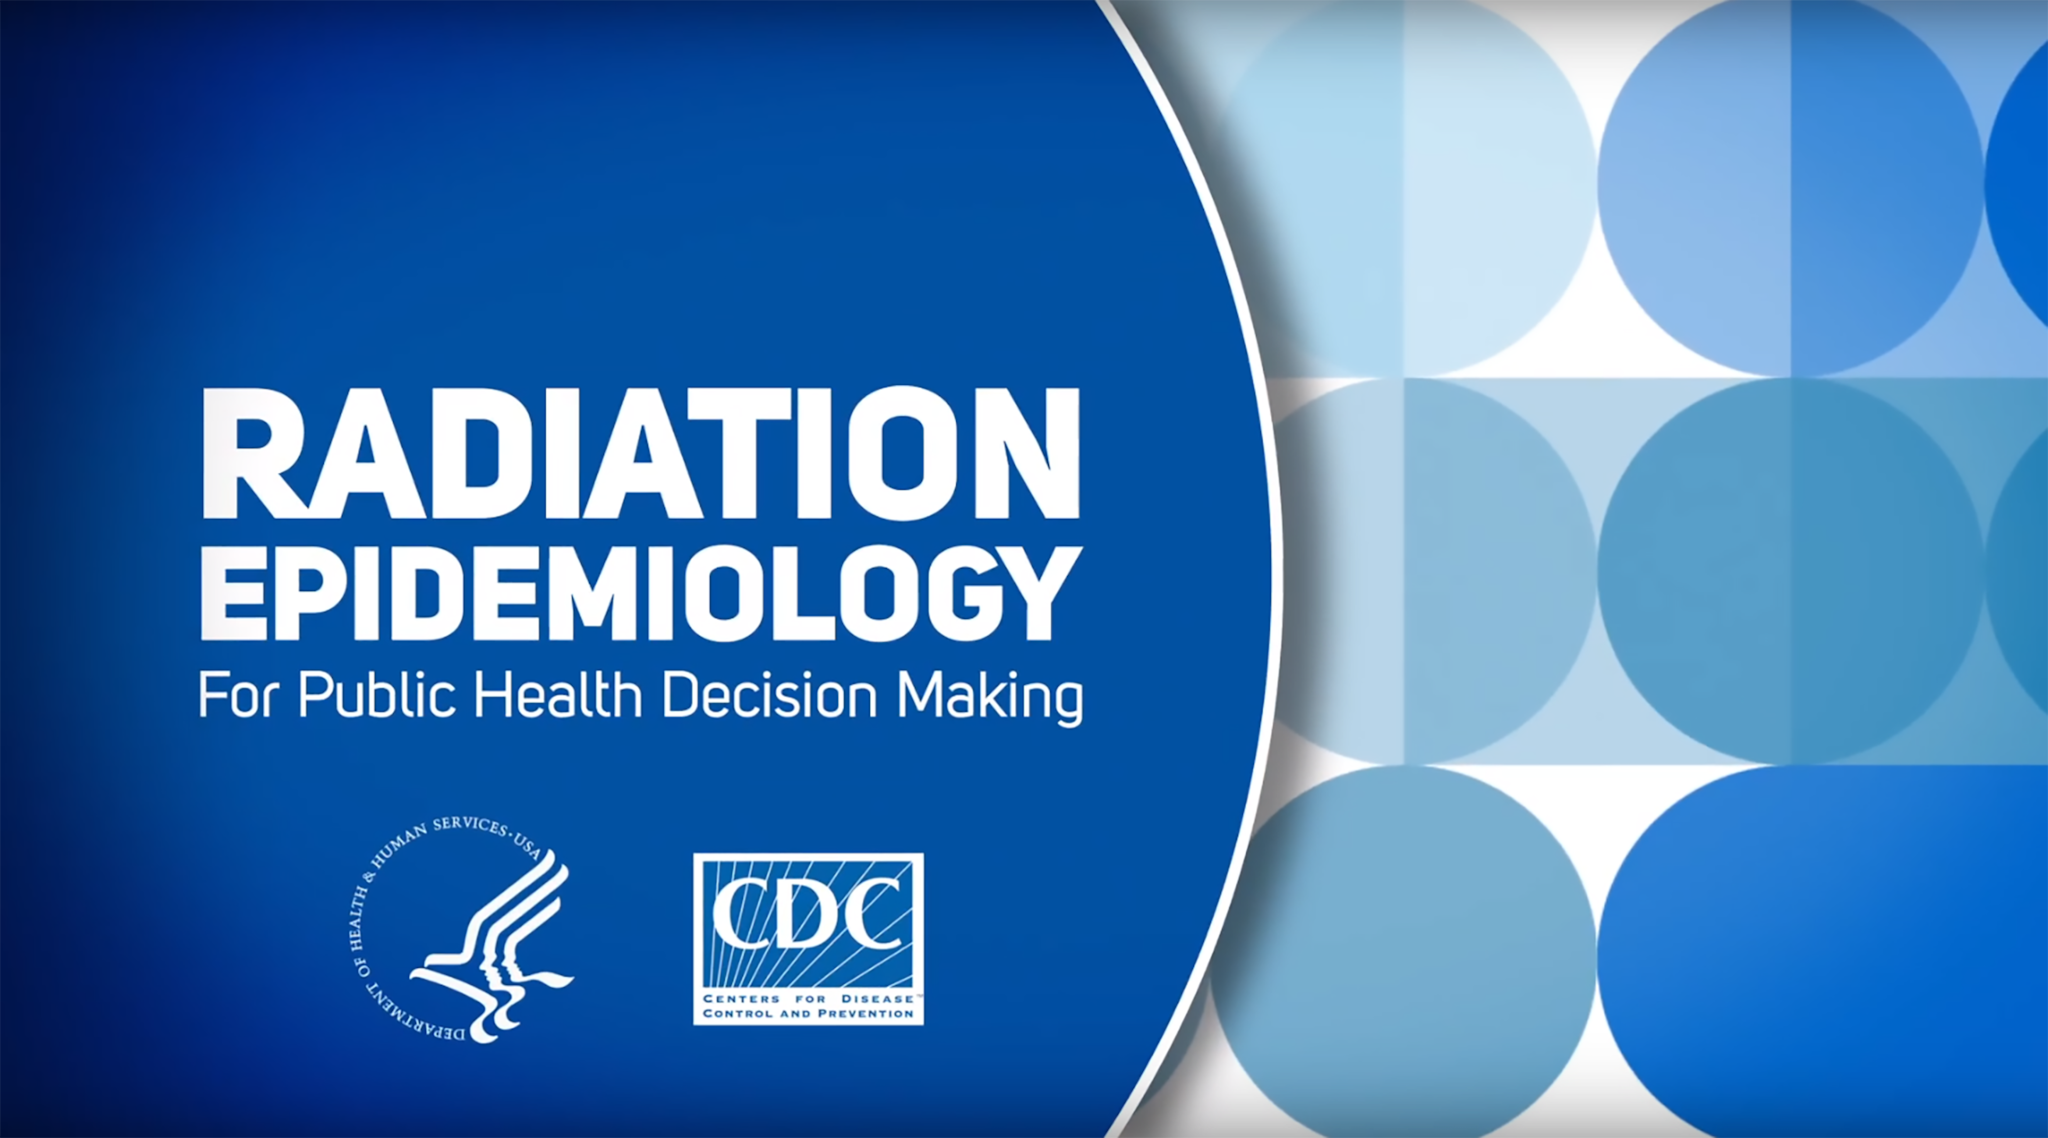 Text says: "Radiation Epidemiology for Public Health Decision Making"